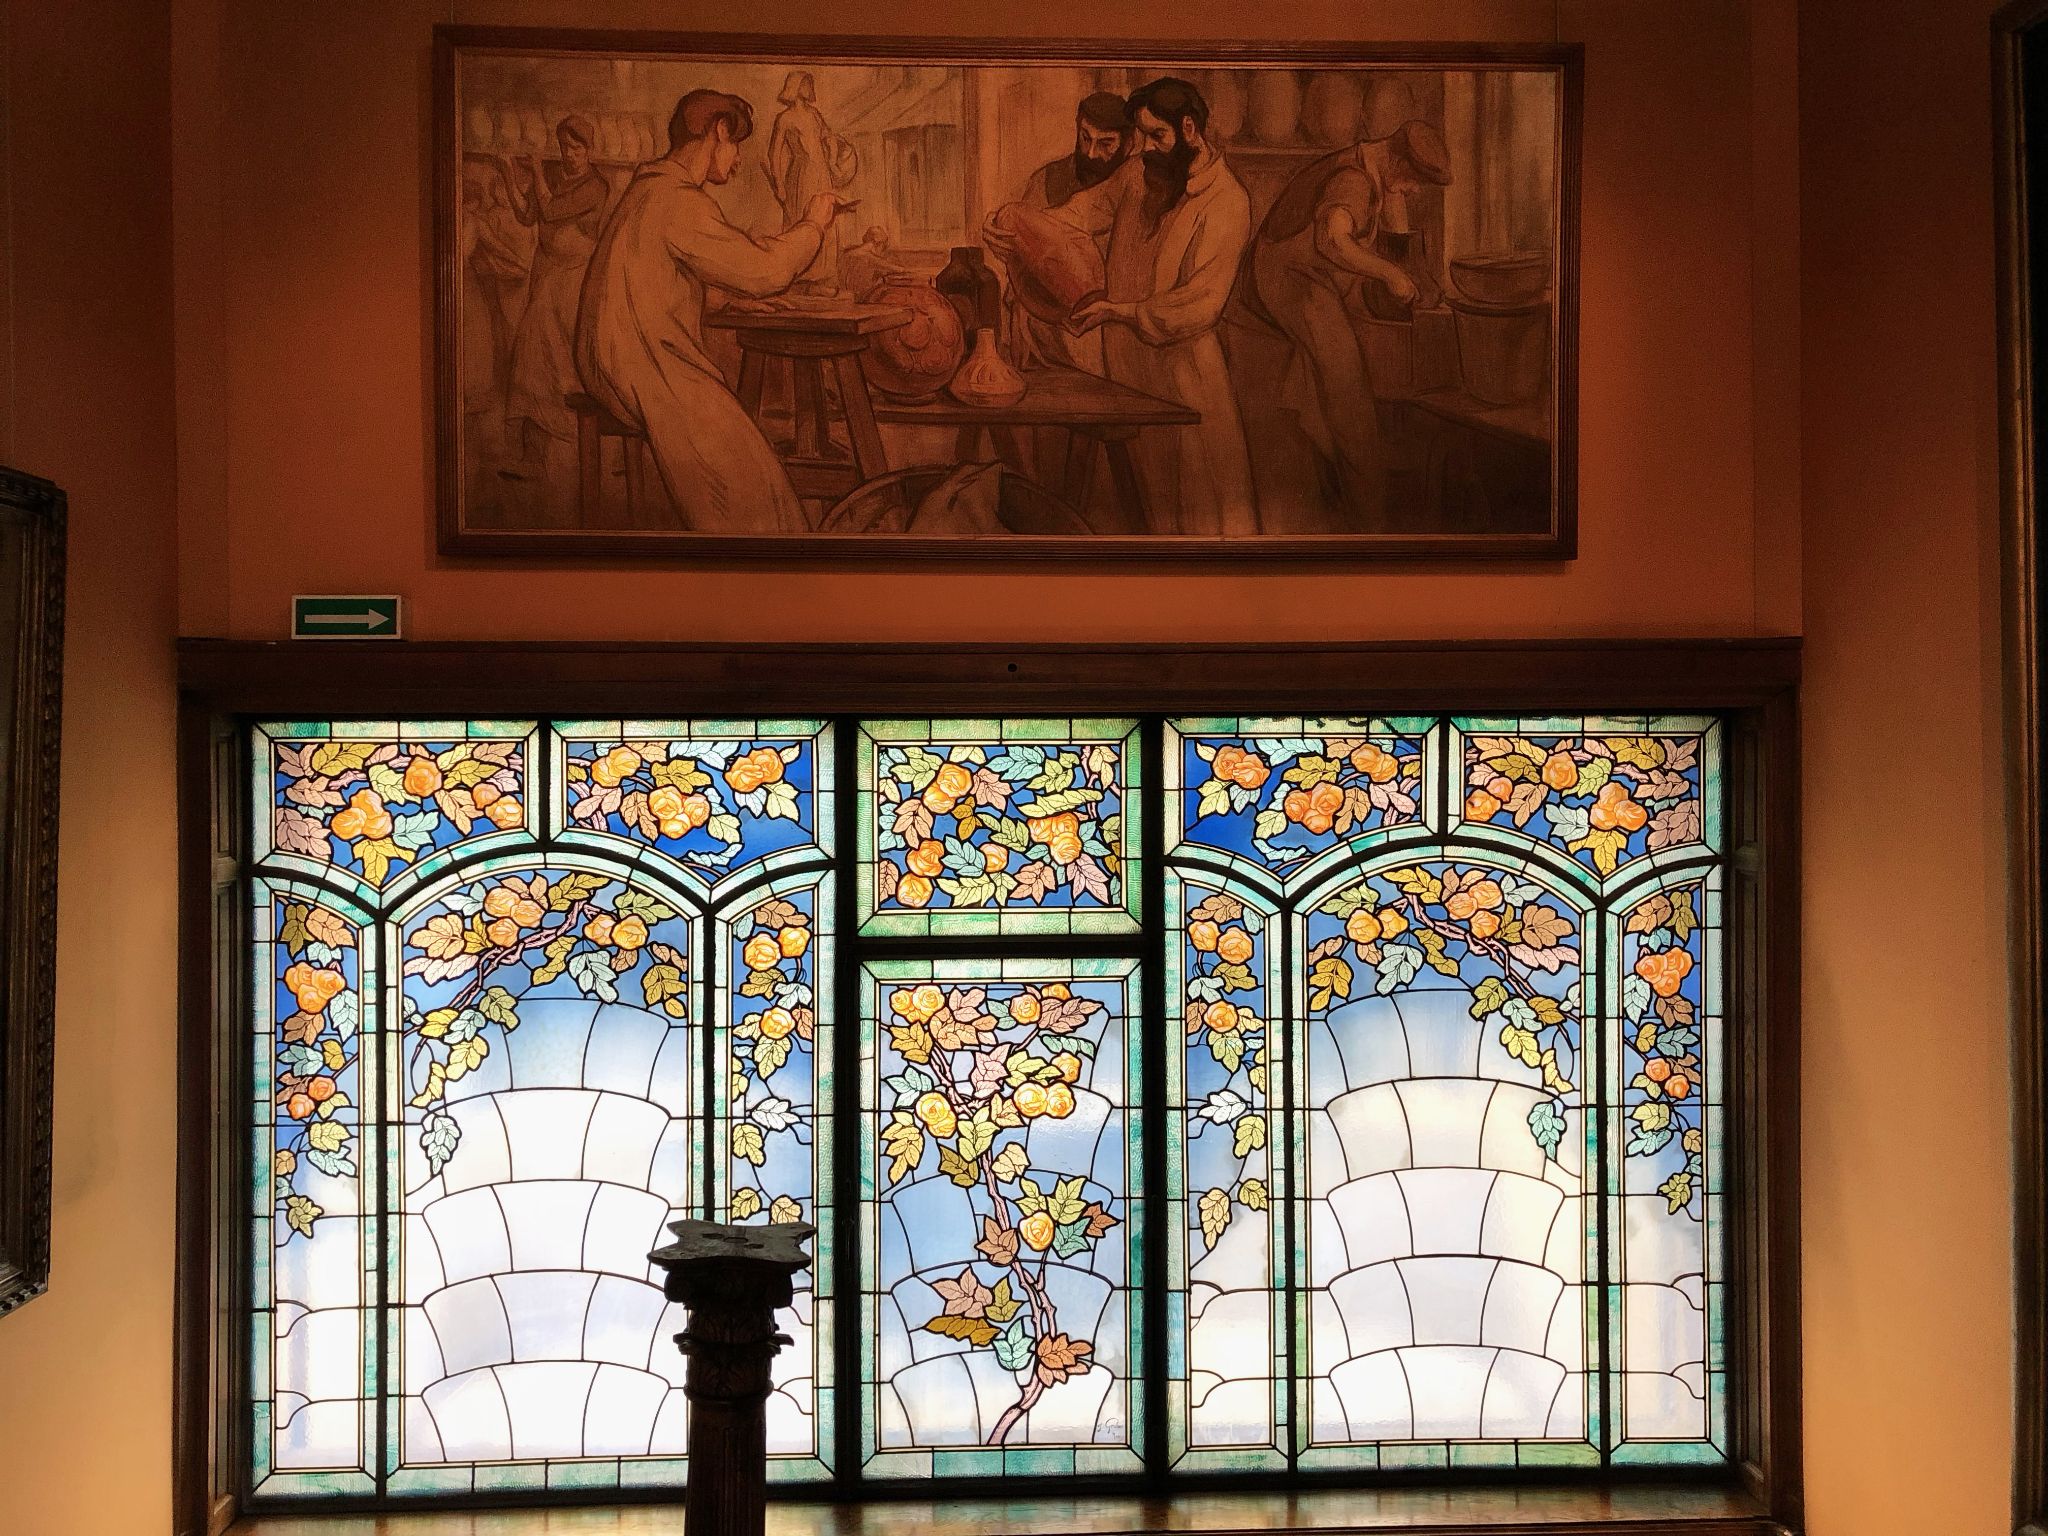 At the museum of the so called "Nancy School of Art nouveau"